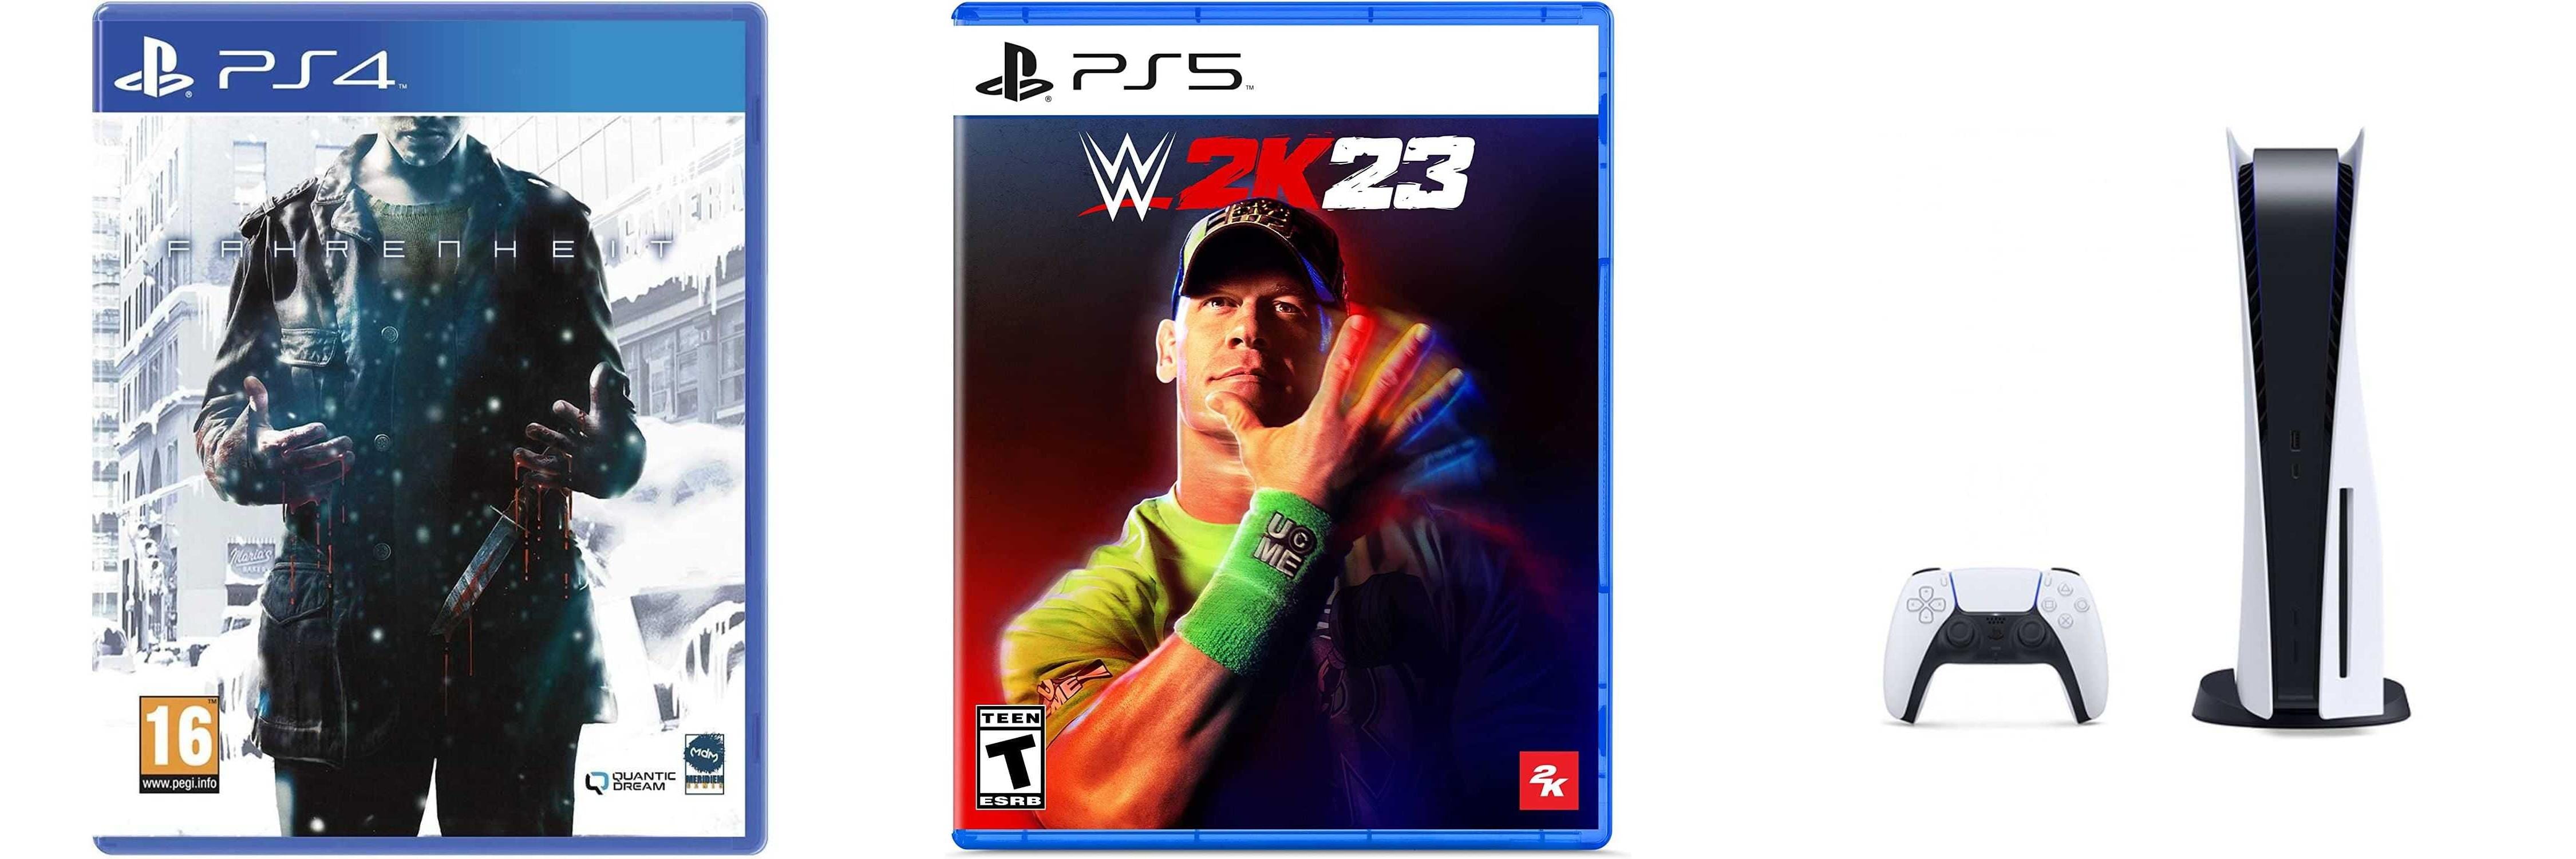 Sony PlayStation 5, 1 Wireless Controller, White - CFI-1016A01 MEE, with Fahrenheit 15th Anniversary Edition, and WWE 2K23 for PlayStation 5